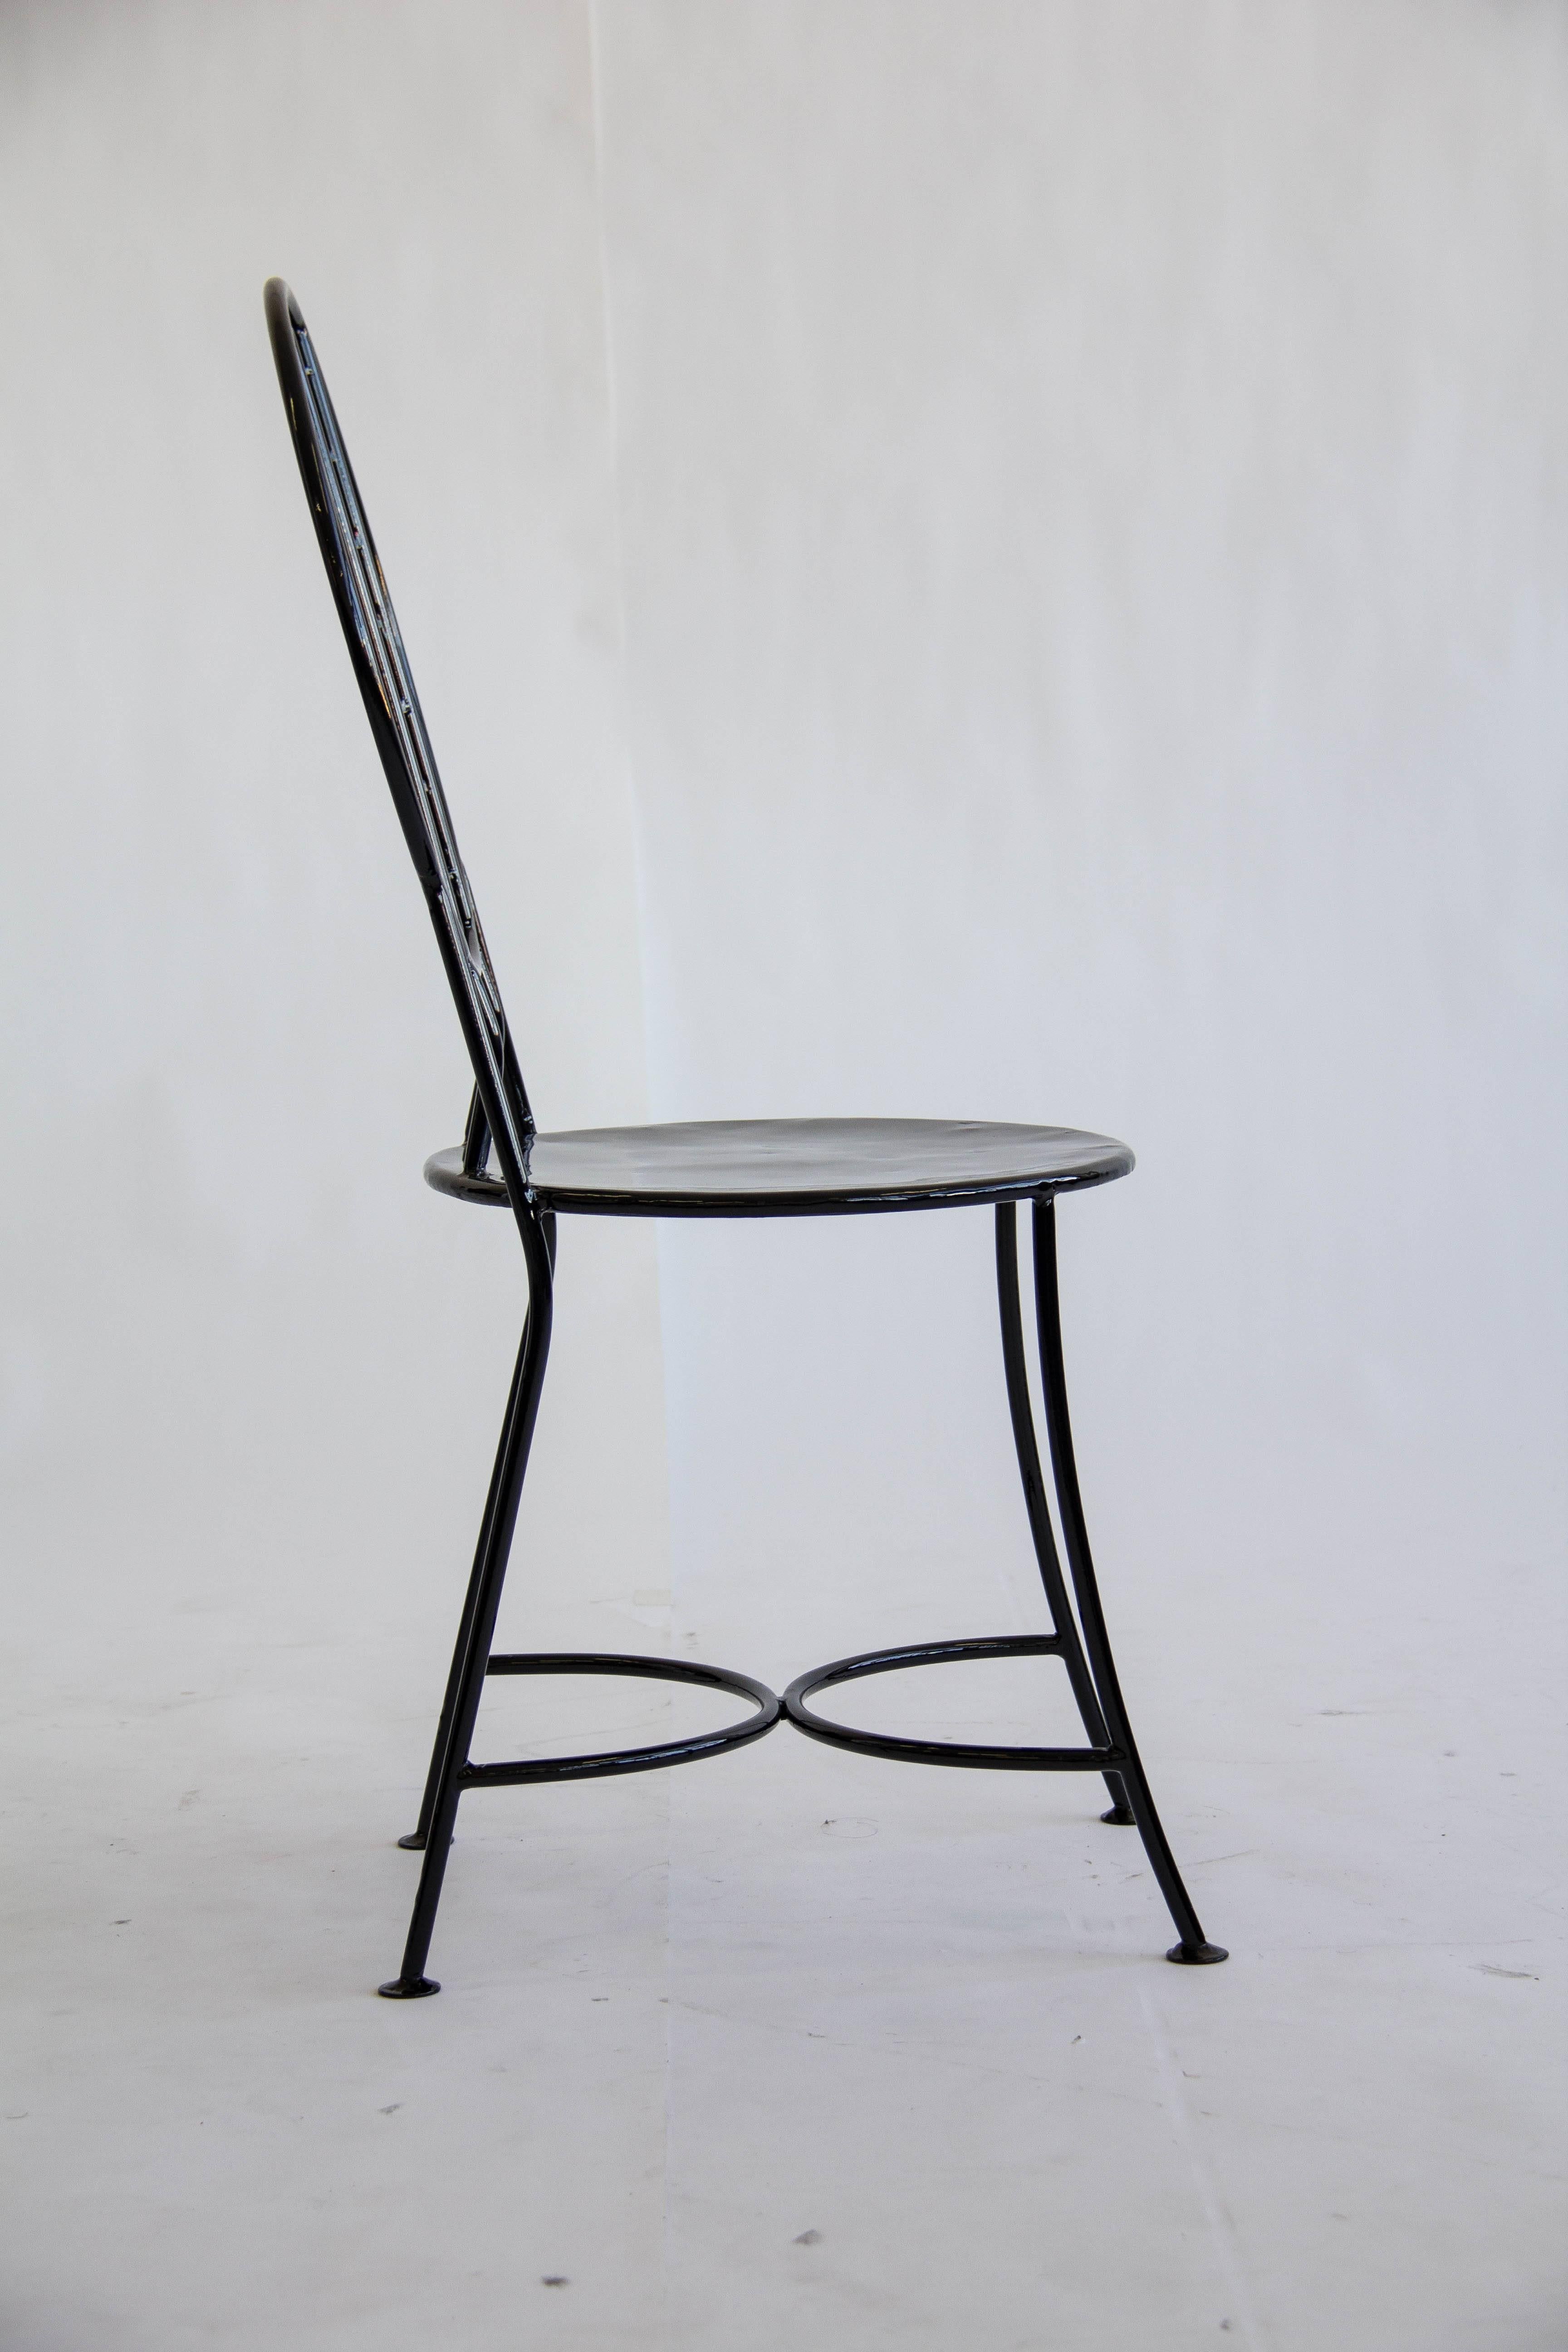 Mid-20th Century Set of Wrought Iron Chairs in the Style of Frank Lloyd Wright's Midway Chair